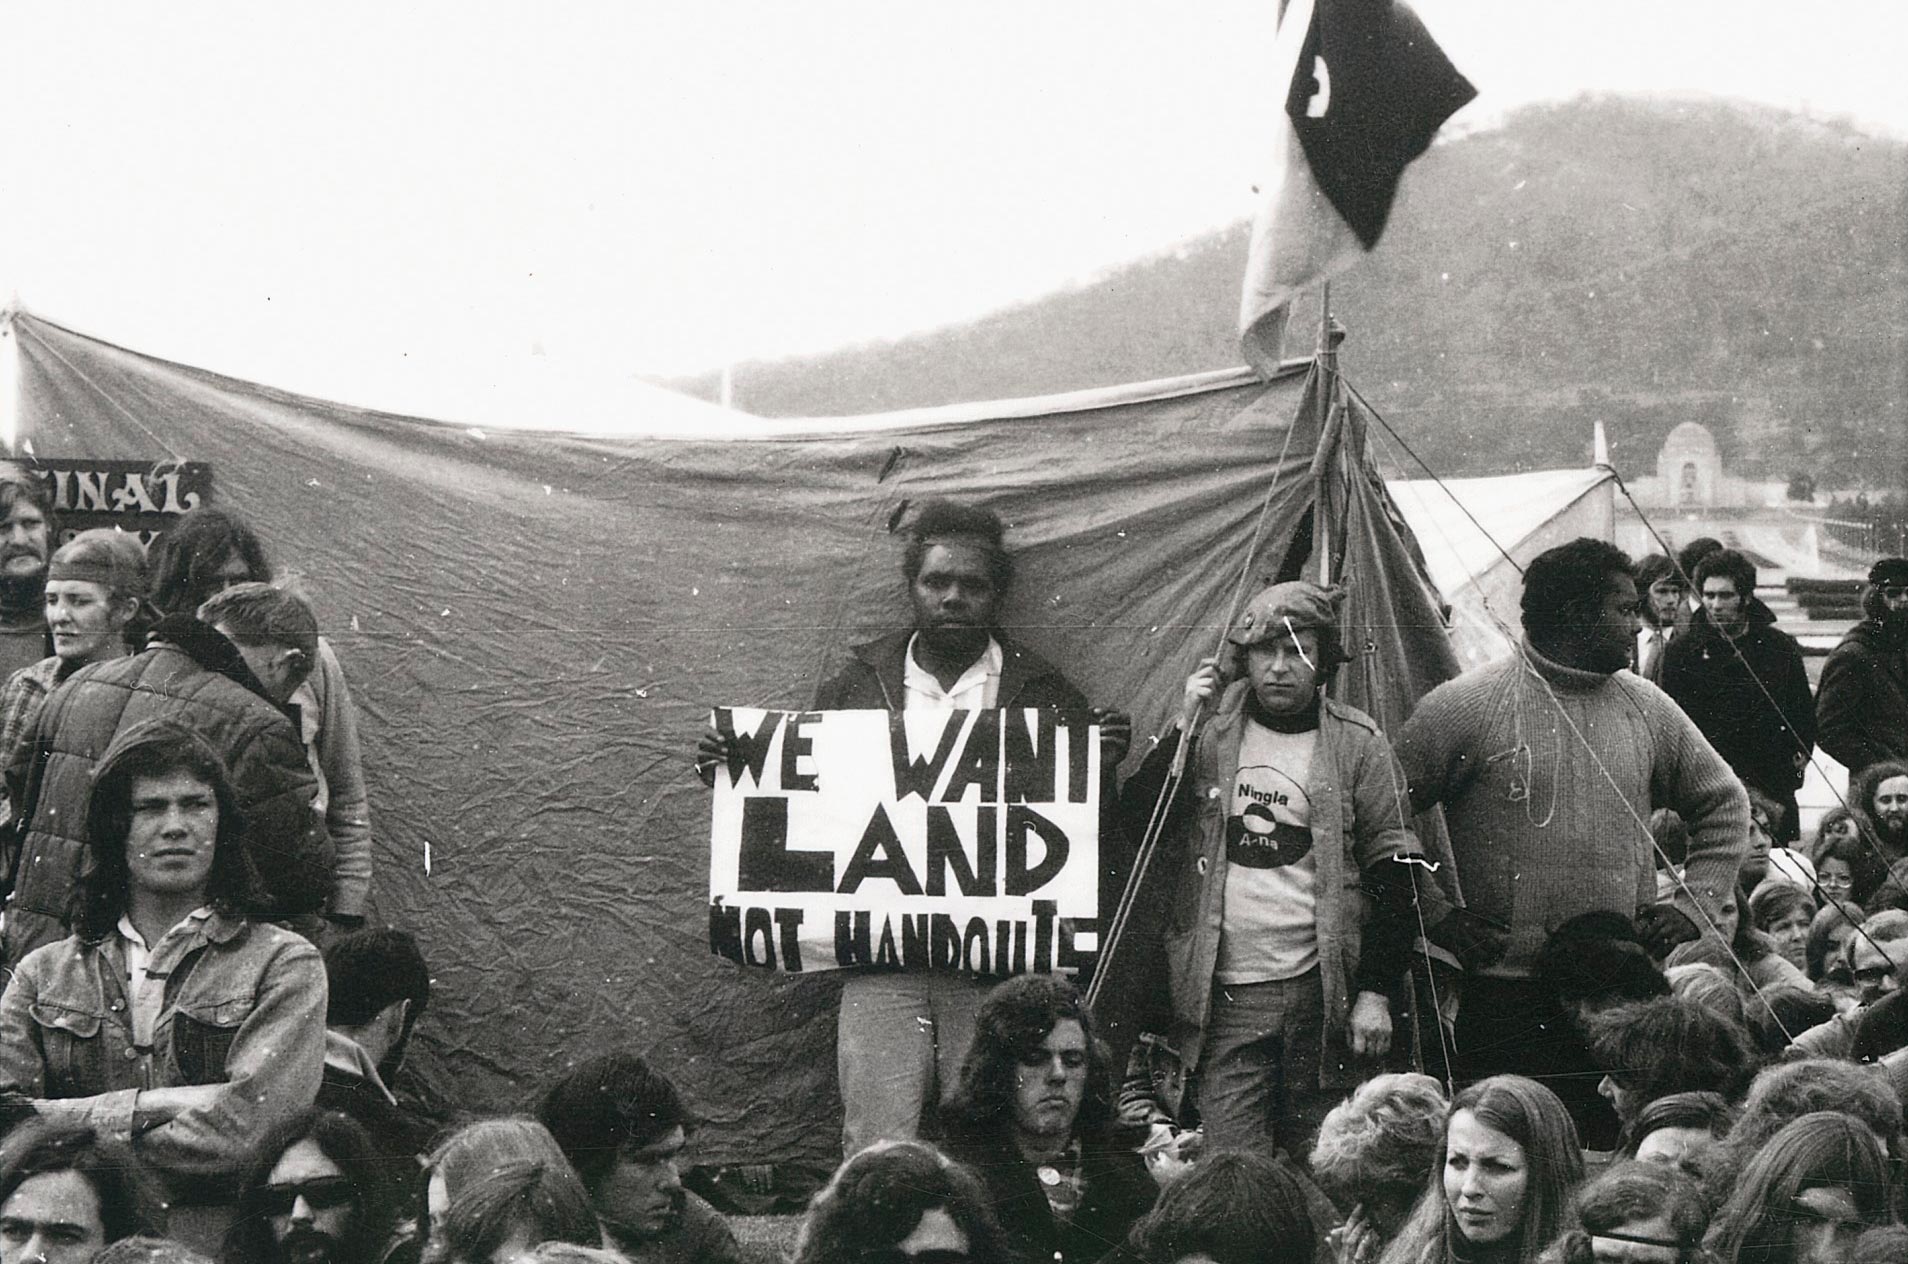 Demonstration with ’We want land not handouts‘ placard at Parliament House, Canberra, 30 July 1972.